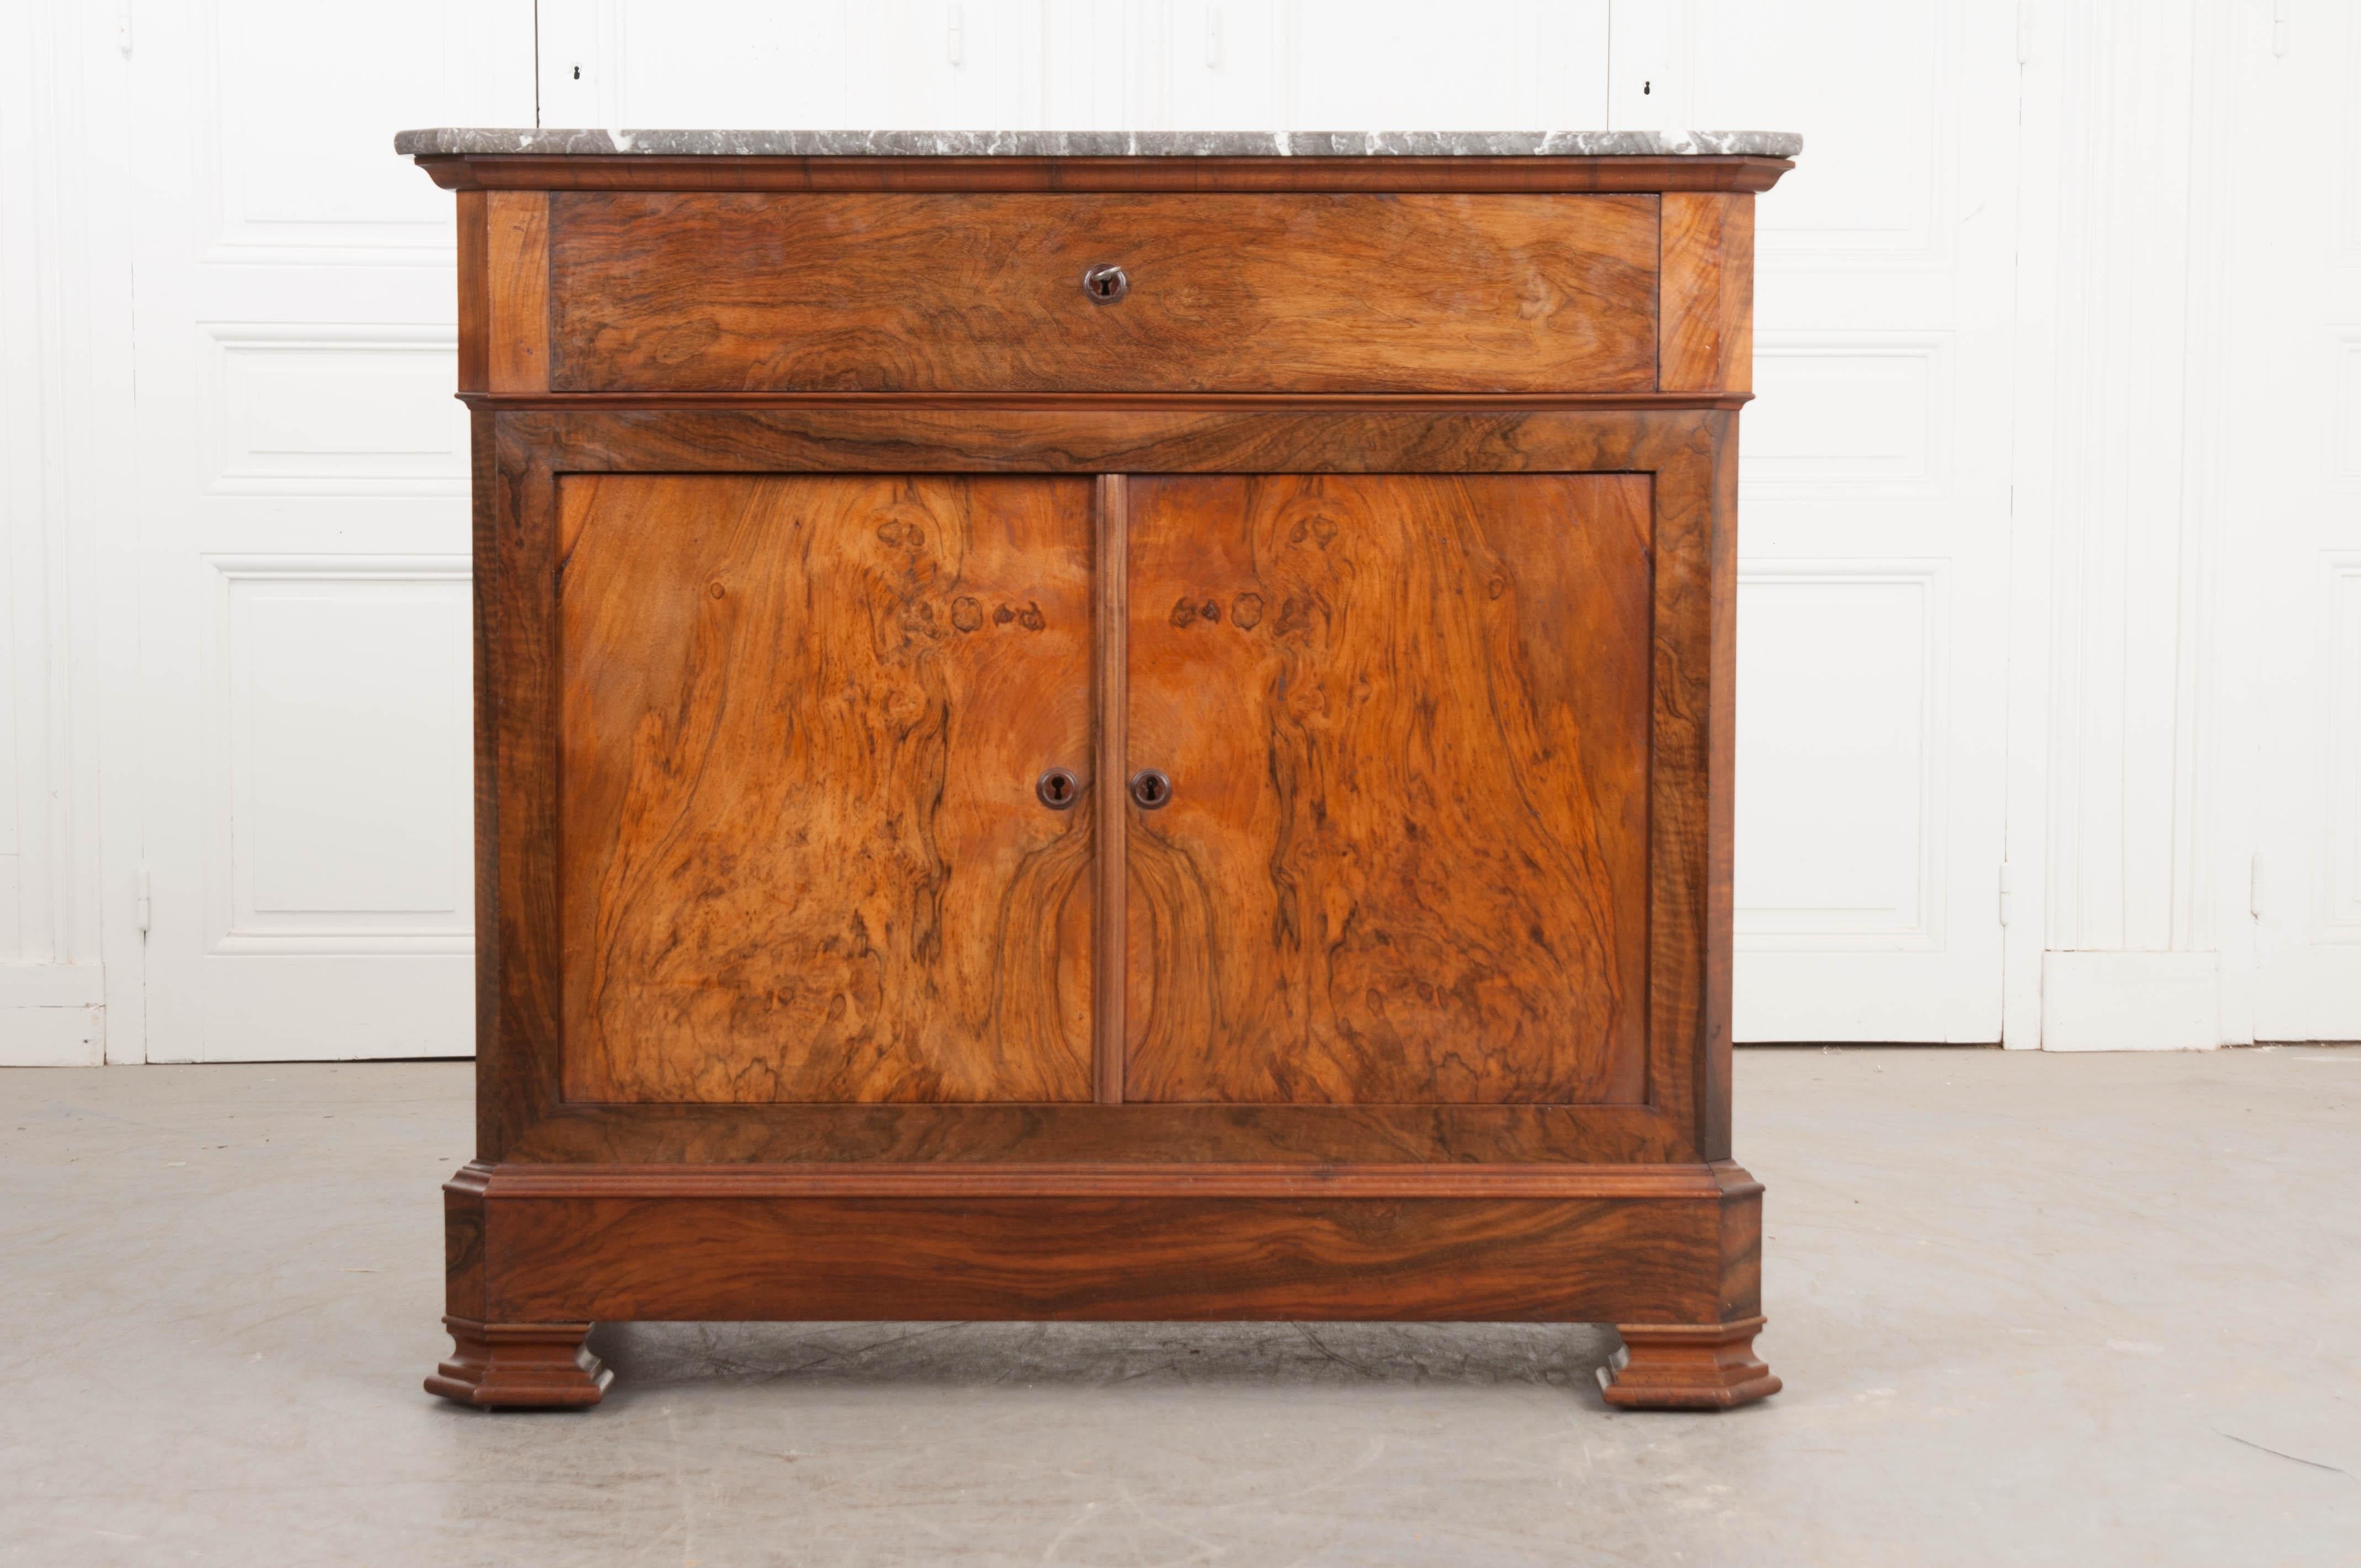 This handsome Louis Philippe marble-top walnut desk, circa 1830s is from France and features charcoal-grey marble with white veining and canted corners over a fall-front apron door which slides open to reveal a leather writing surface and four